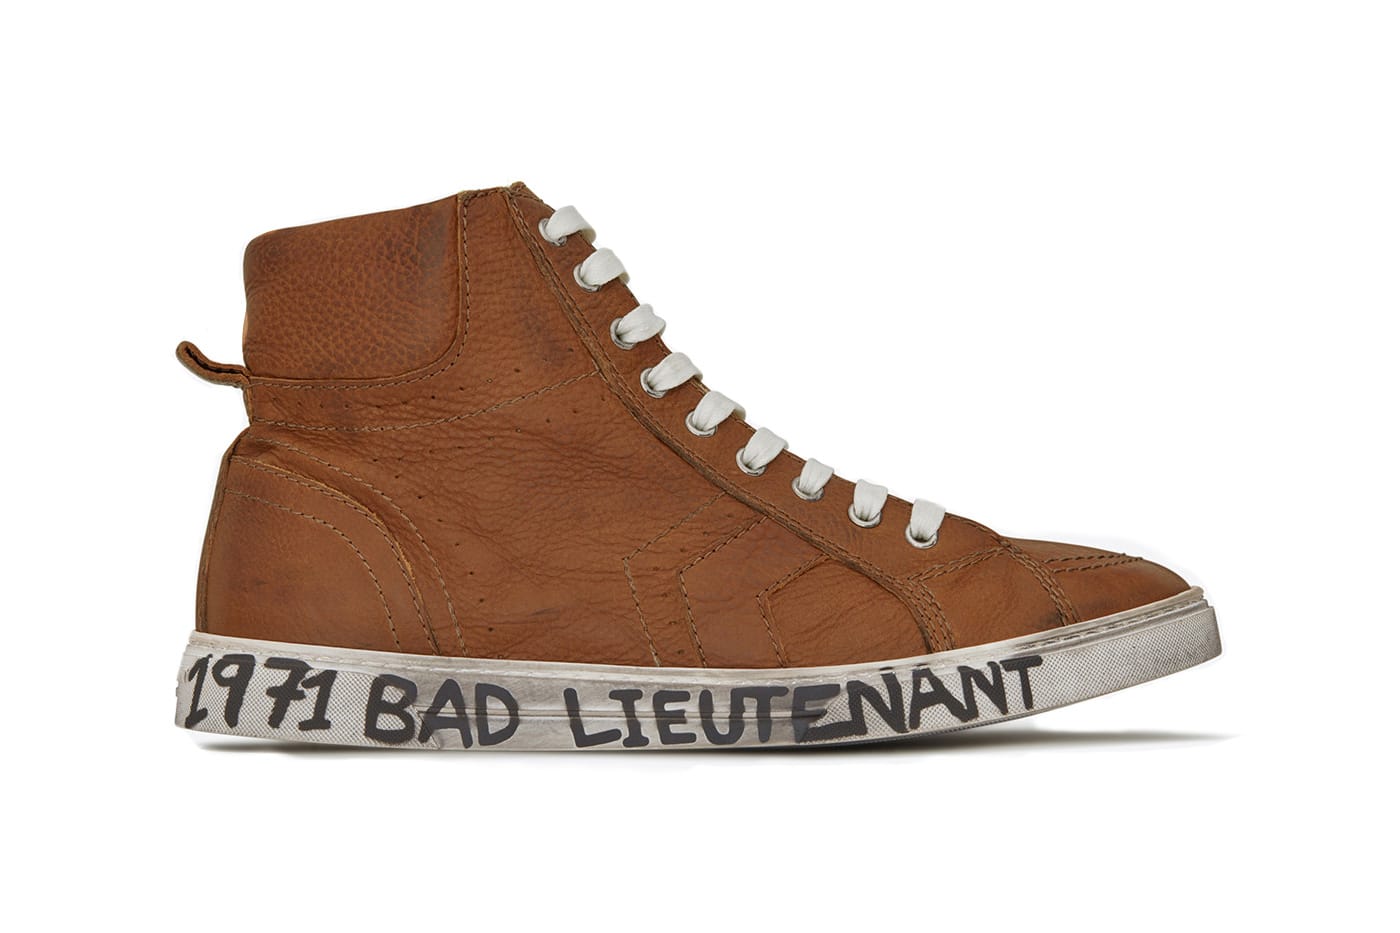 ysl smoking forever shoes